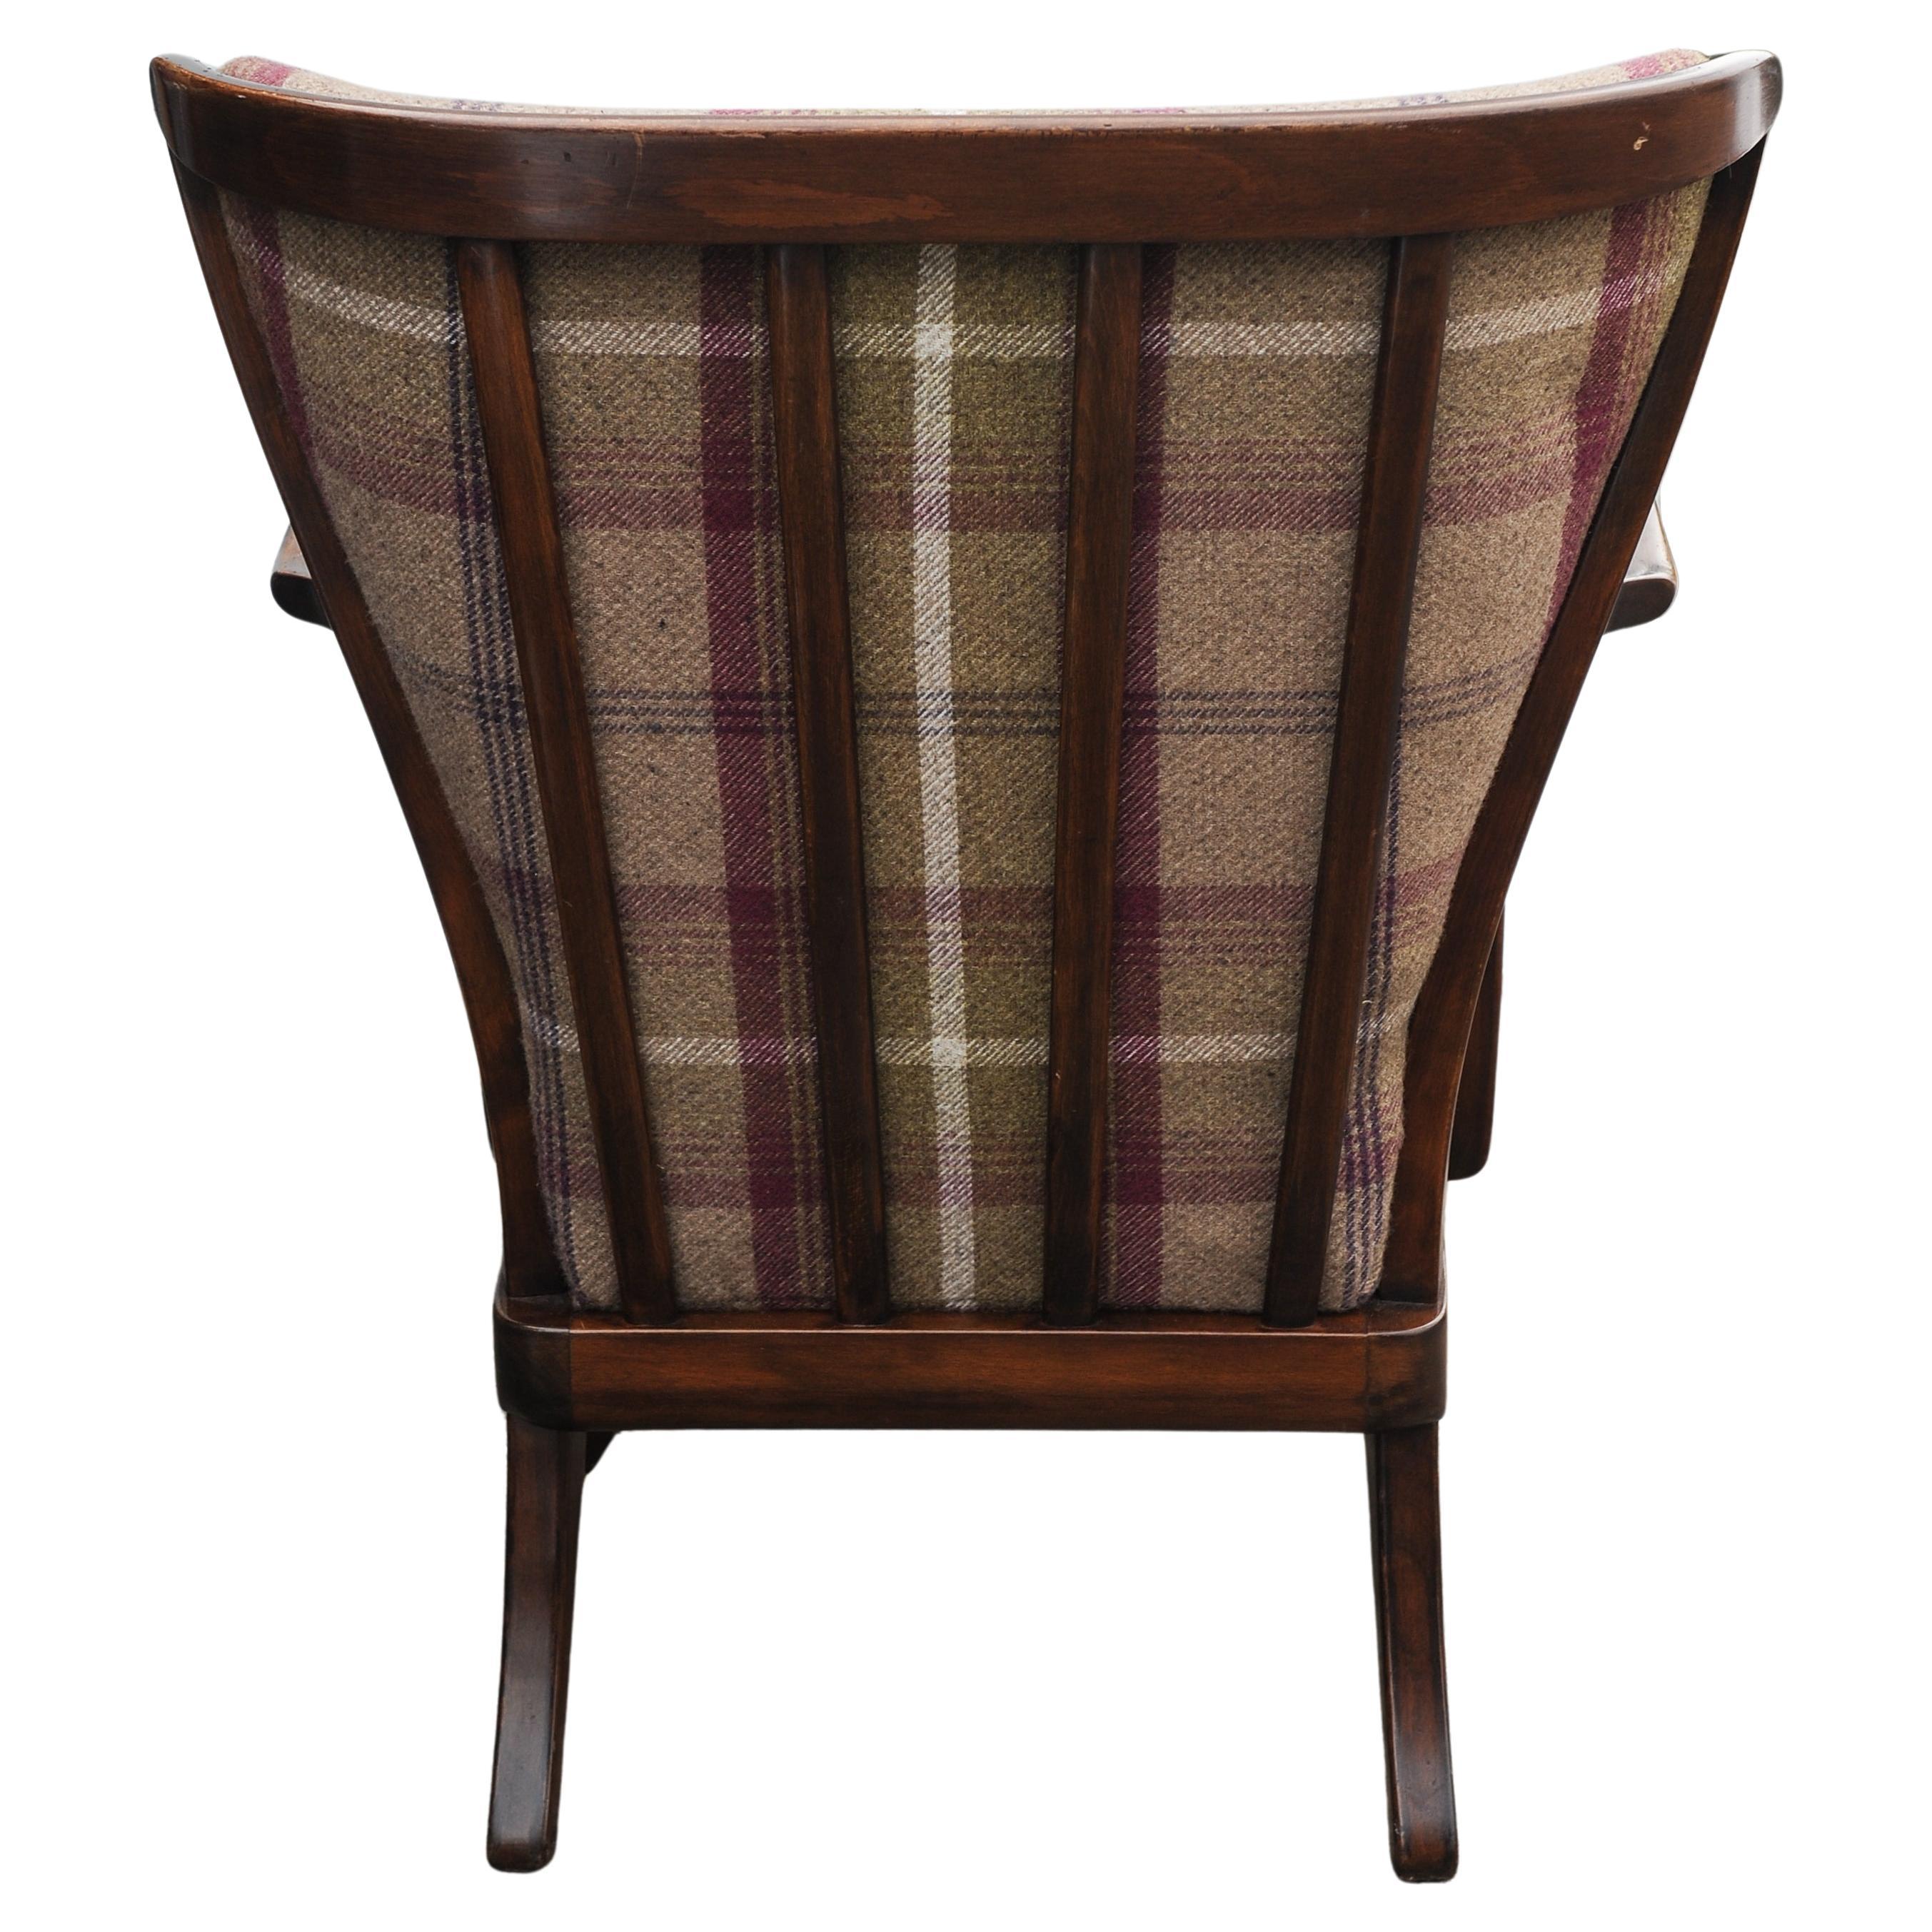 1940's Fritz Hansen Art Deco Oak Bentwood Armchair with Wool Plaid Upholstery  In Good Condition For Sale In High Wycombe, GB